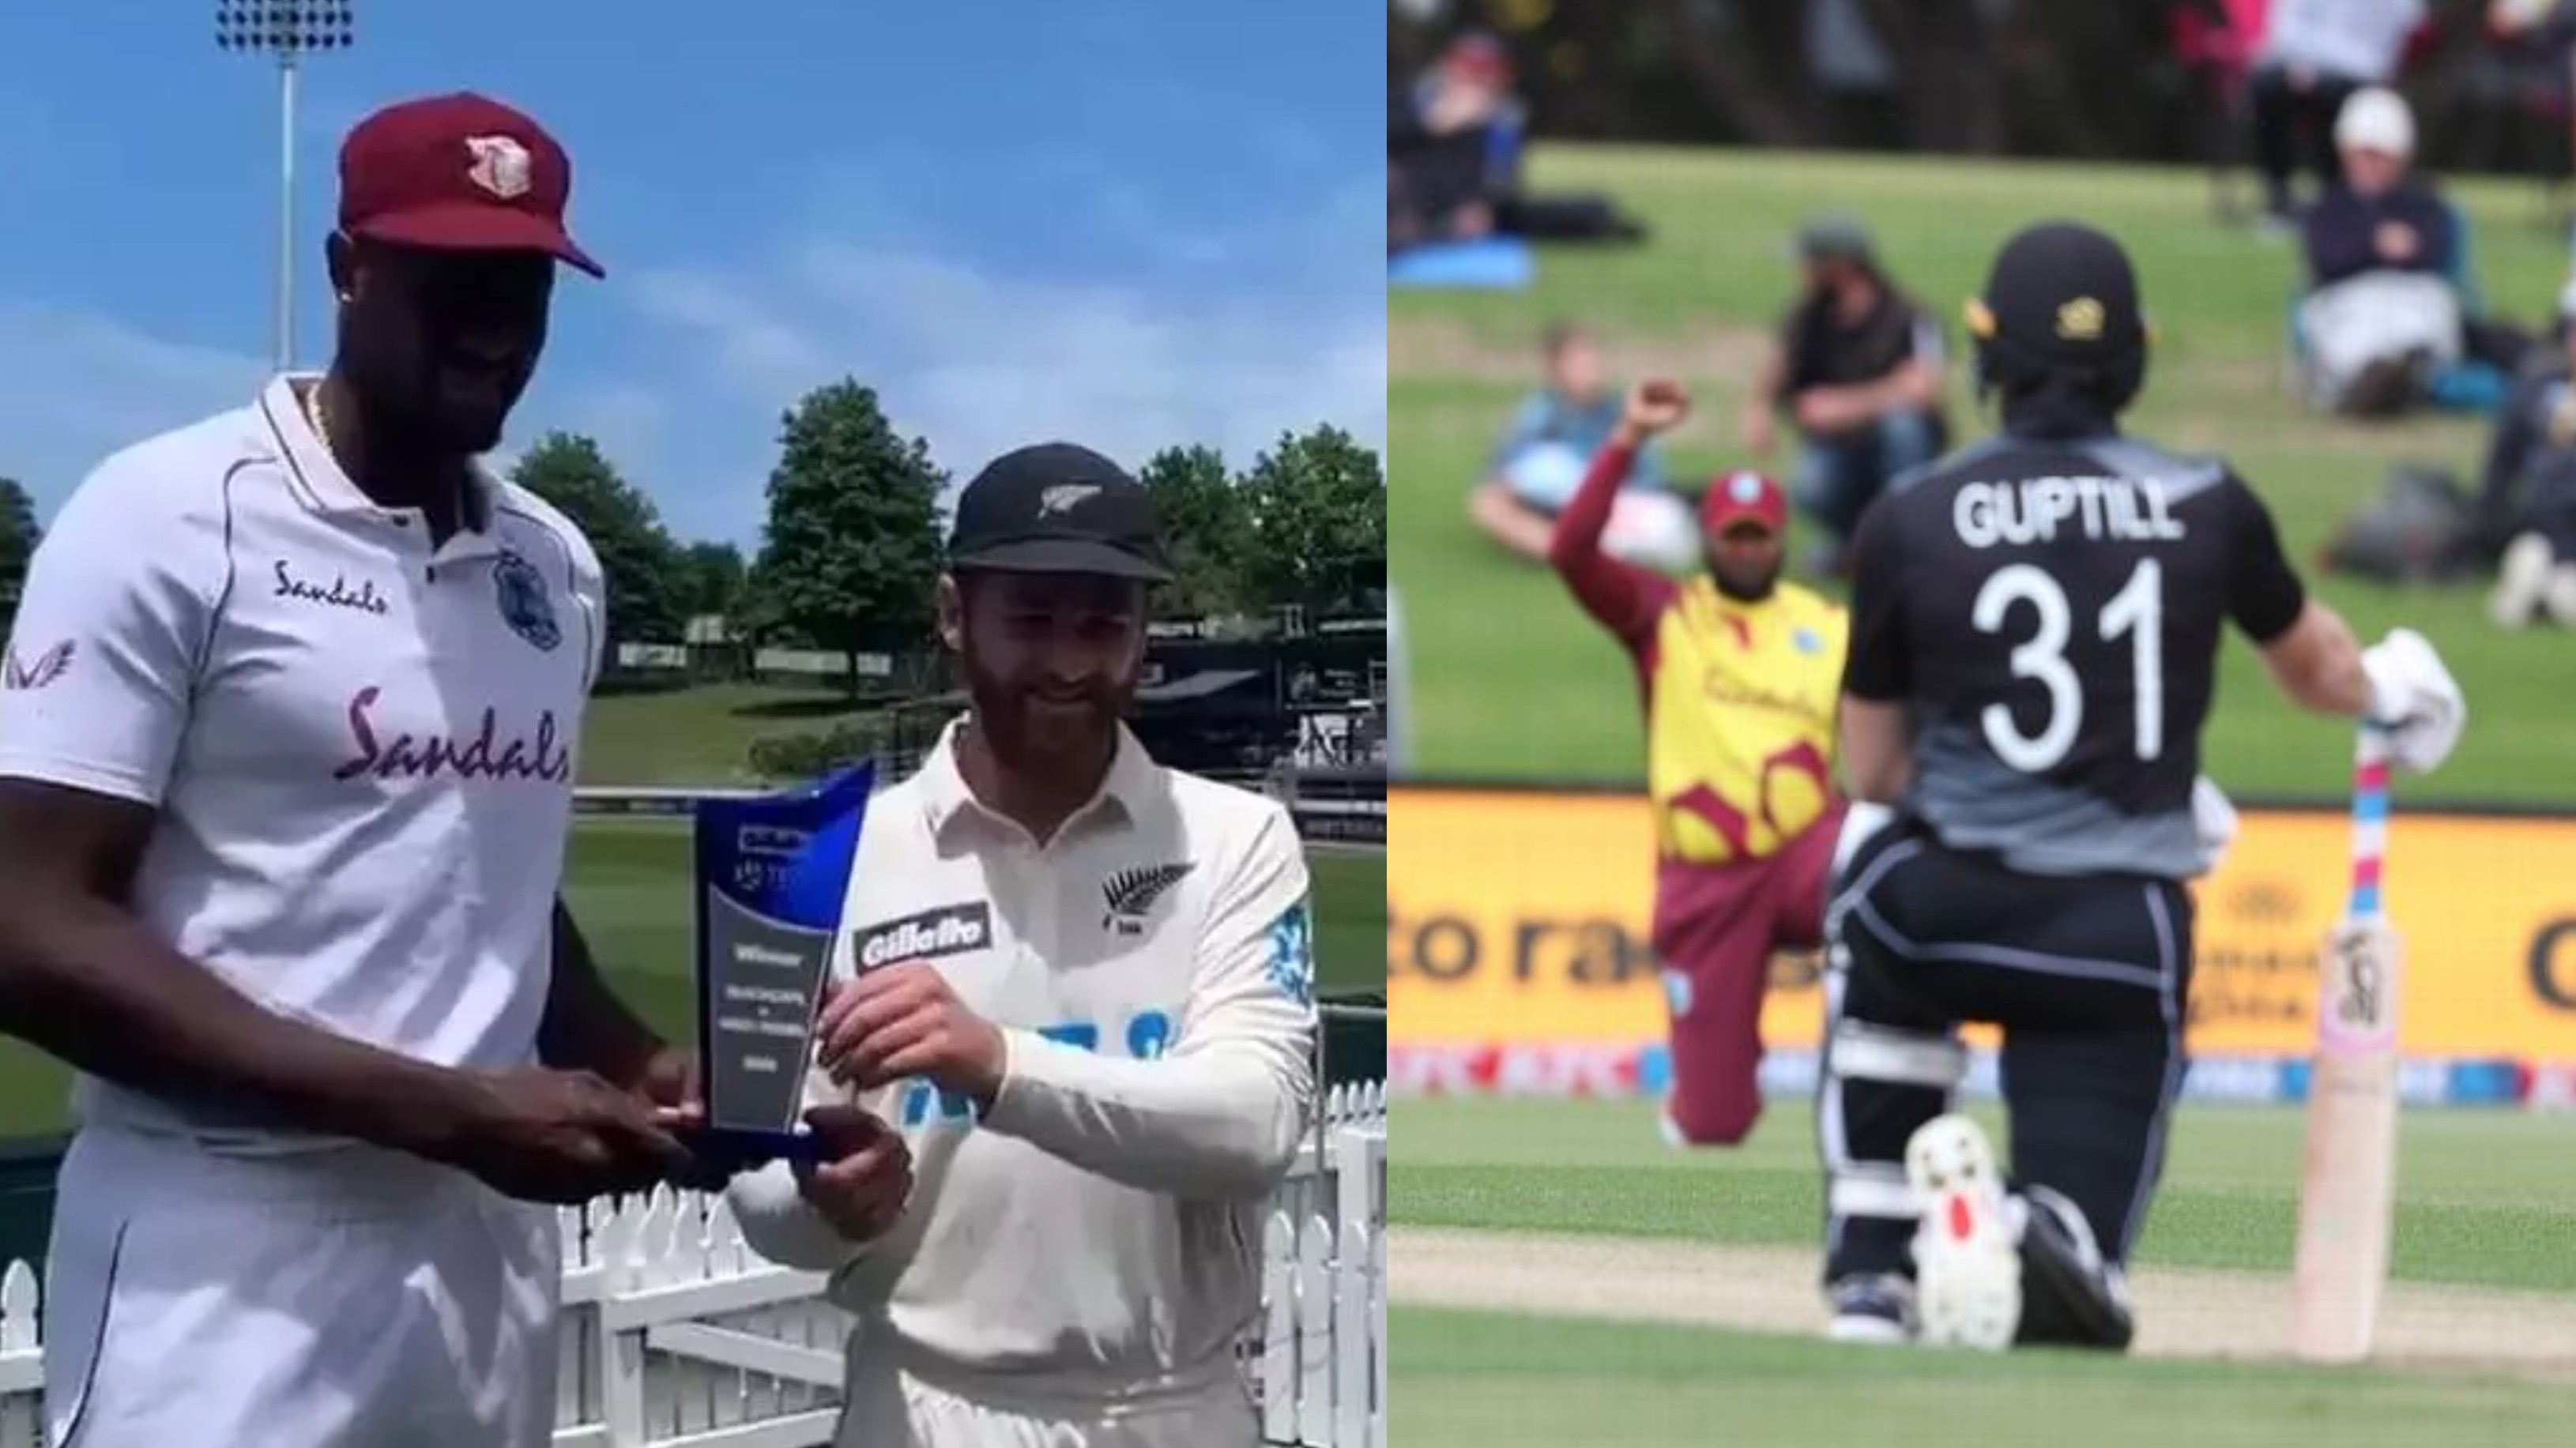 NZ v WI 2020: New Zealand and West Indies to continue kneeling in Tests to support BLM movement